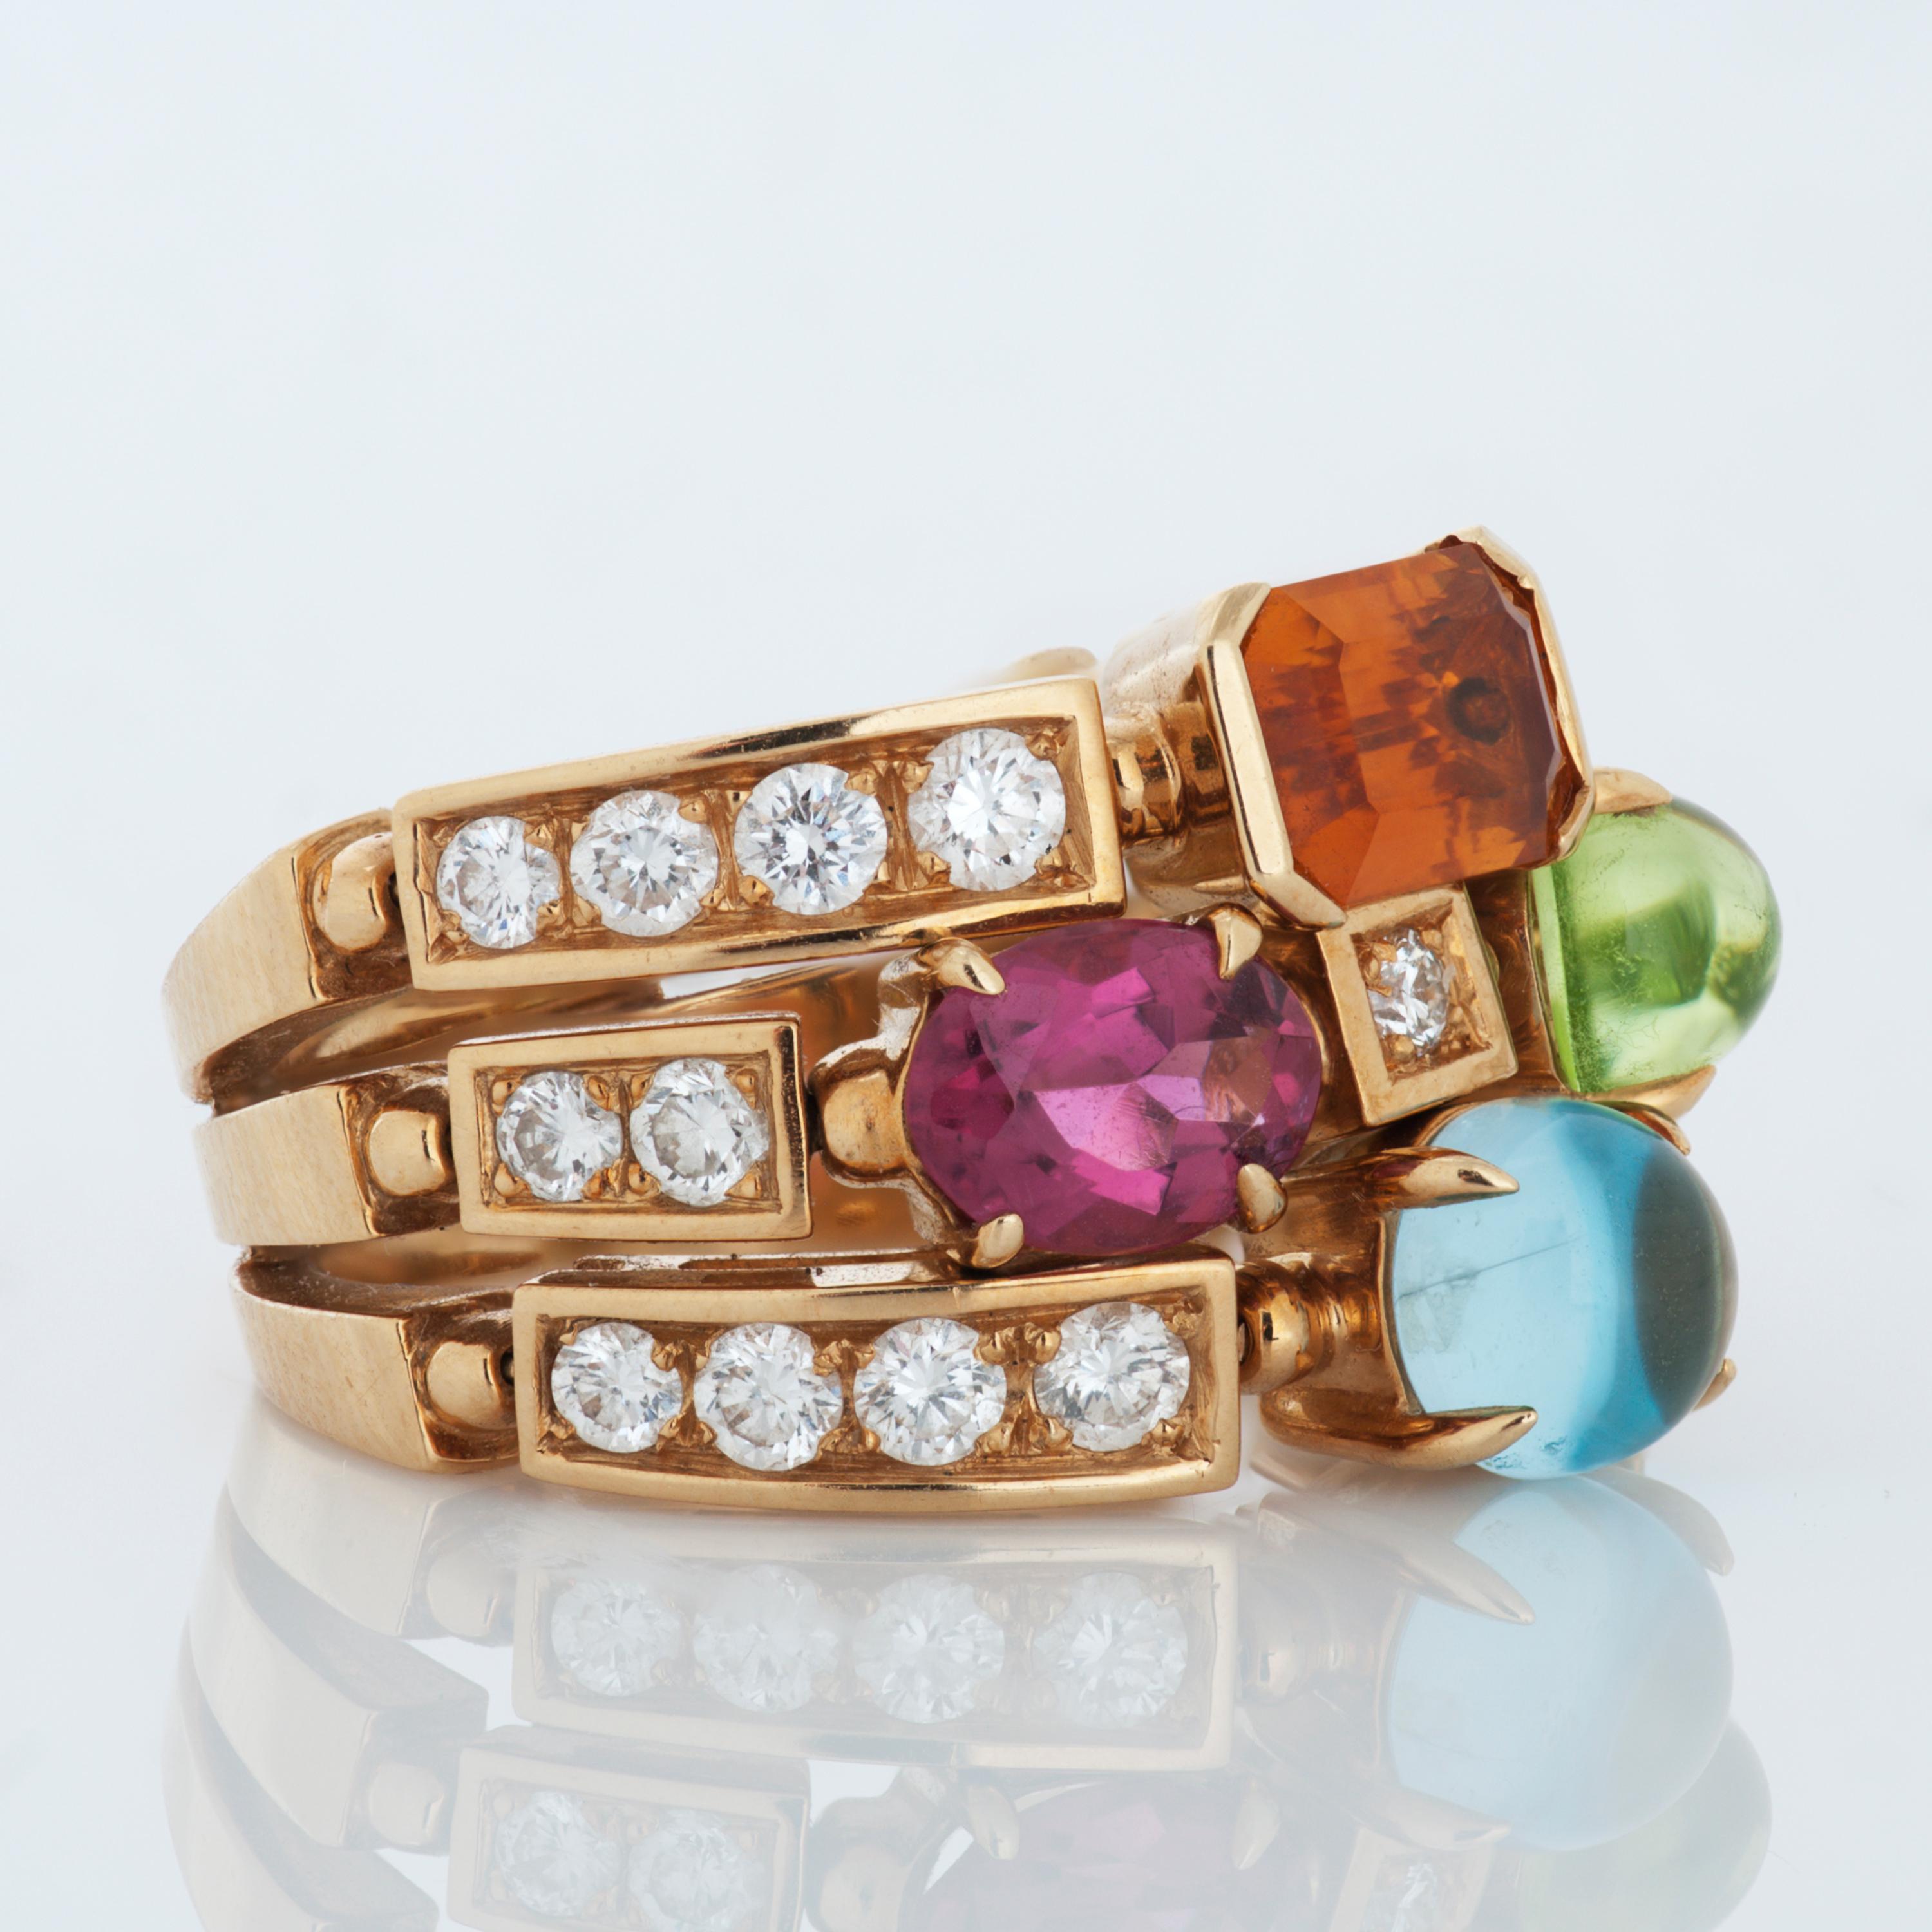 Bvlgari Allegra diamond and multi-gemstone ring in 18k yellow gold, accompanied by Bvlgari box. 

This Bvlgari ring features 1 round cabochon blue topaz, 1 pear shape cabochon peridot, 1 faceted oval pink tourmaline and 1 step cut citrine, as well